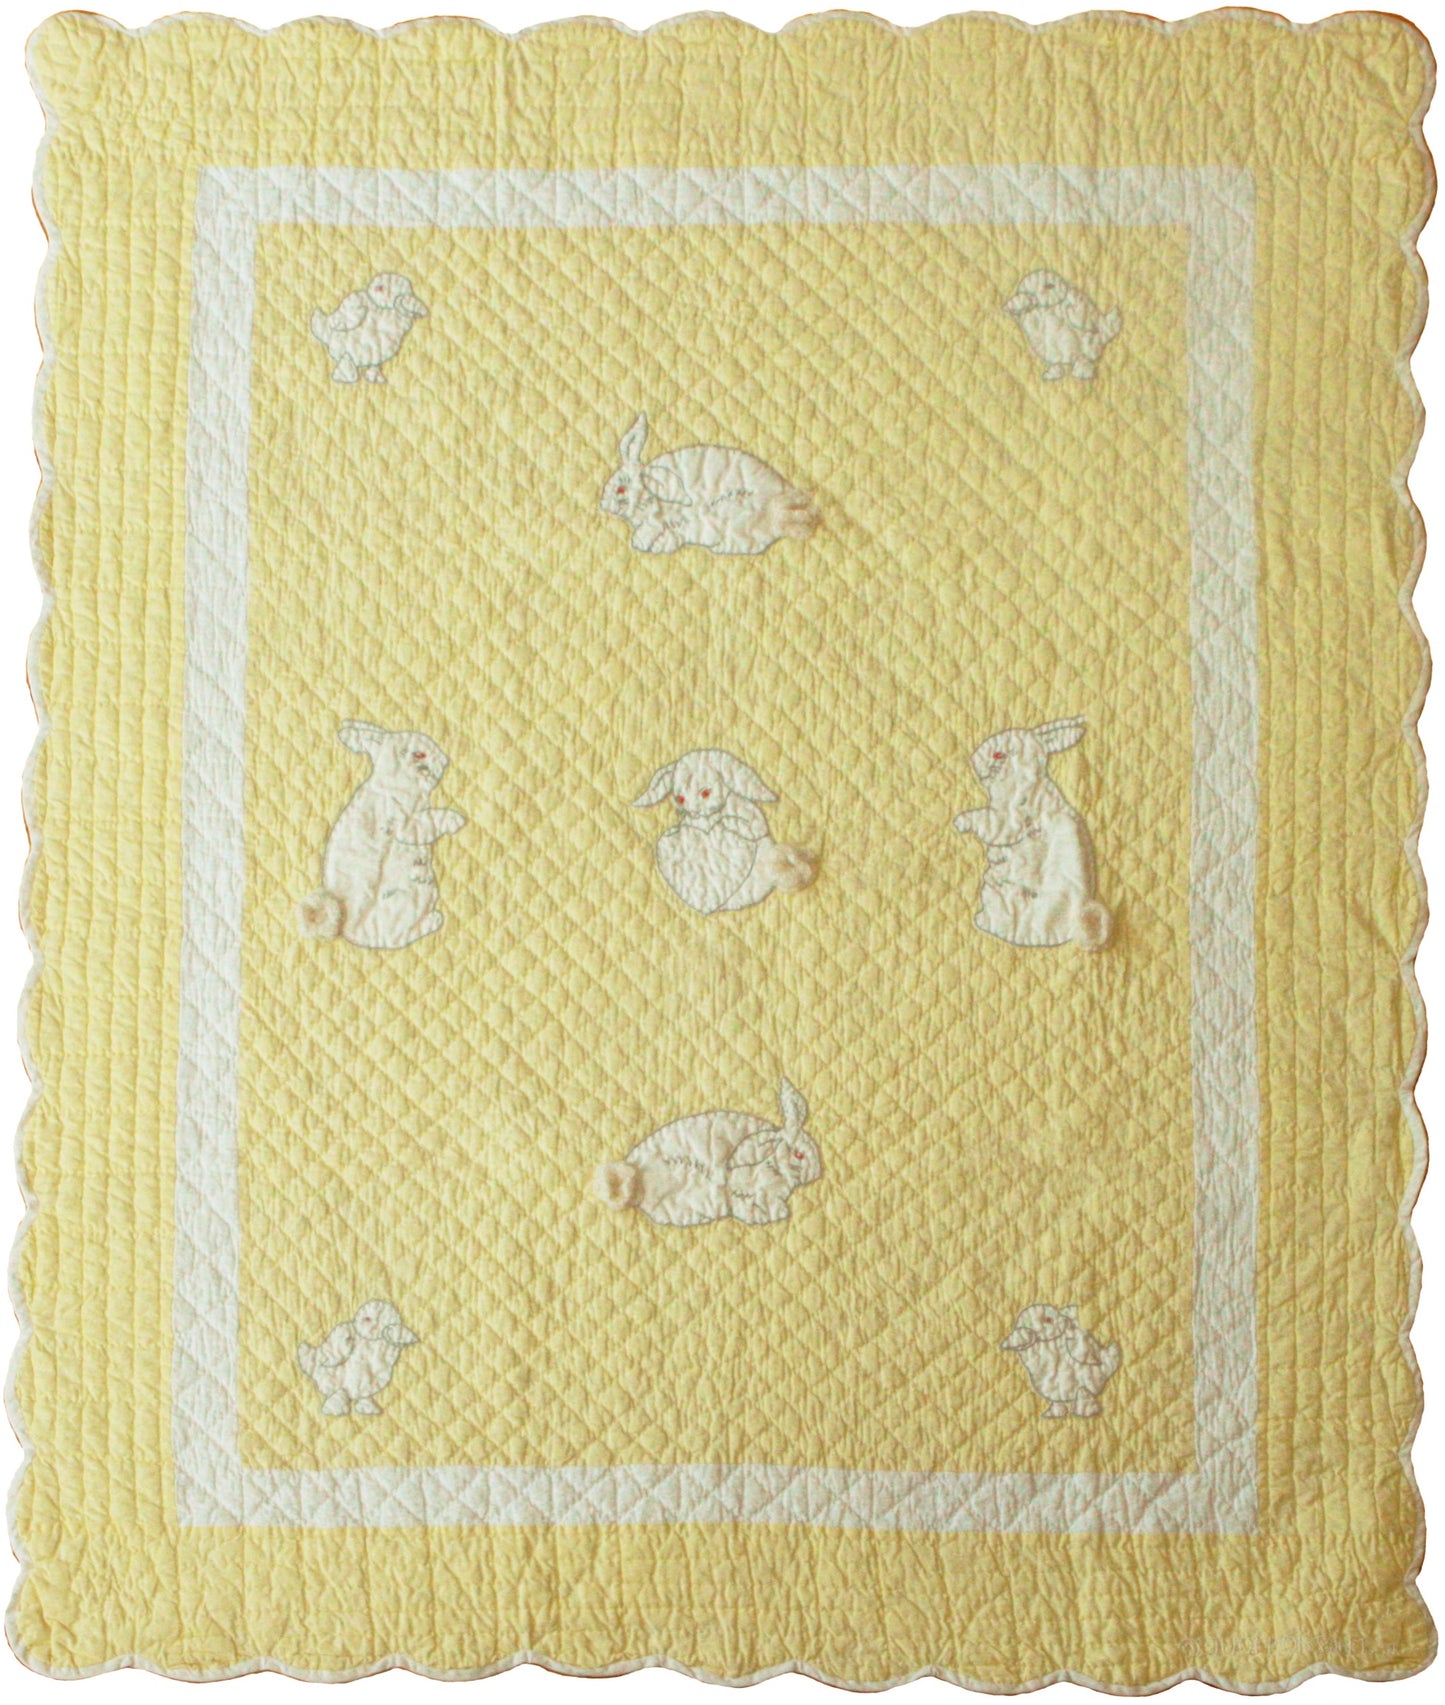 "Bunny" in Butter Crib Quilt 41" X 52"